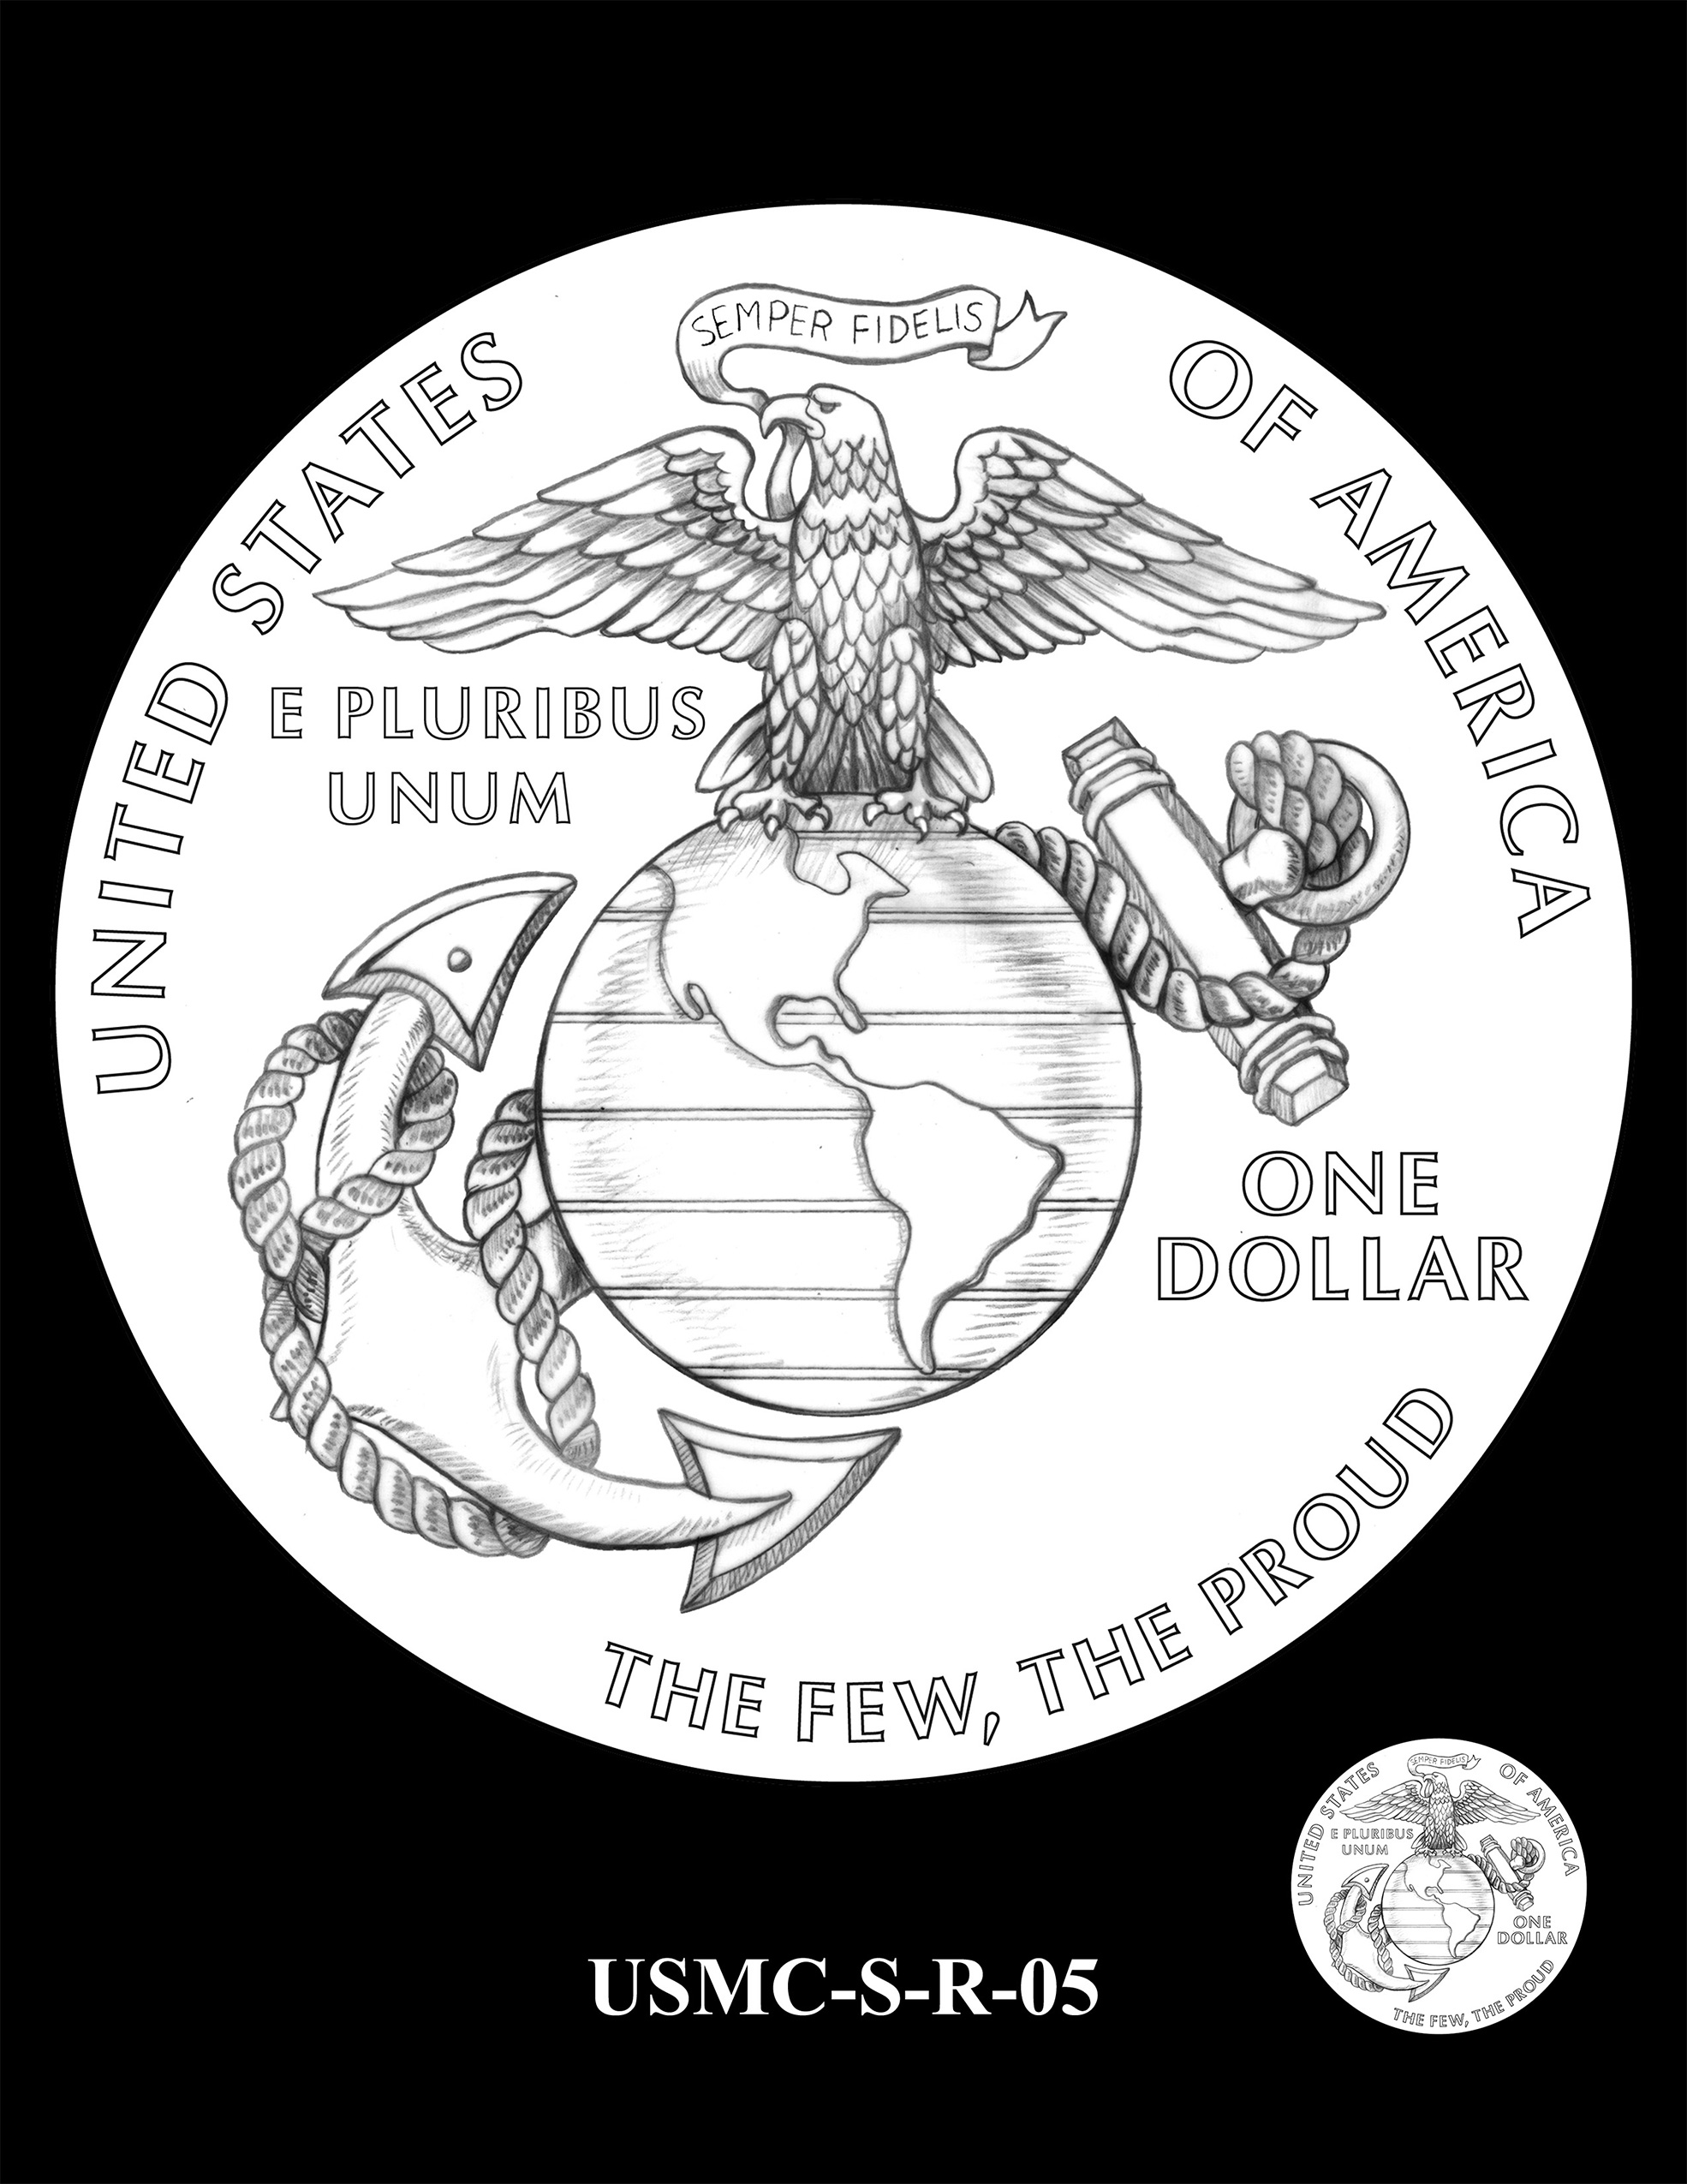 USMC-S-R-05 -- 250th Anniversary of the United States Marine Corps - Silver